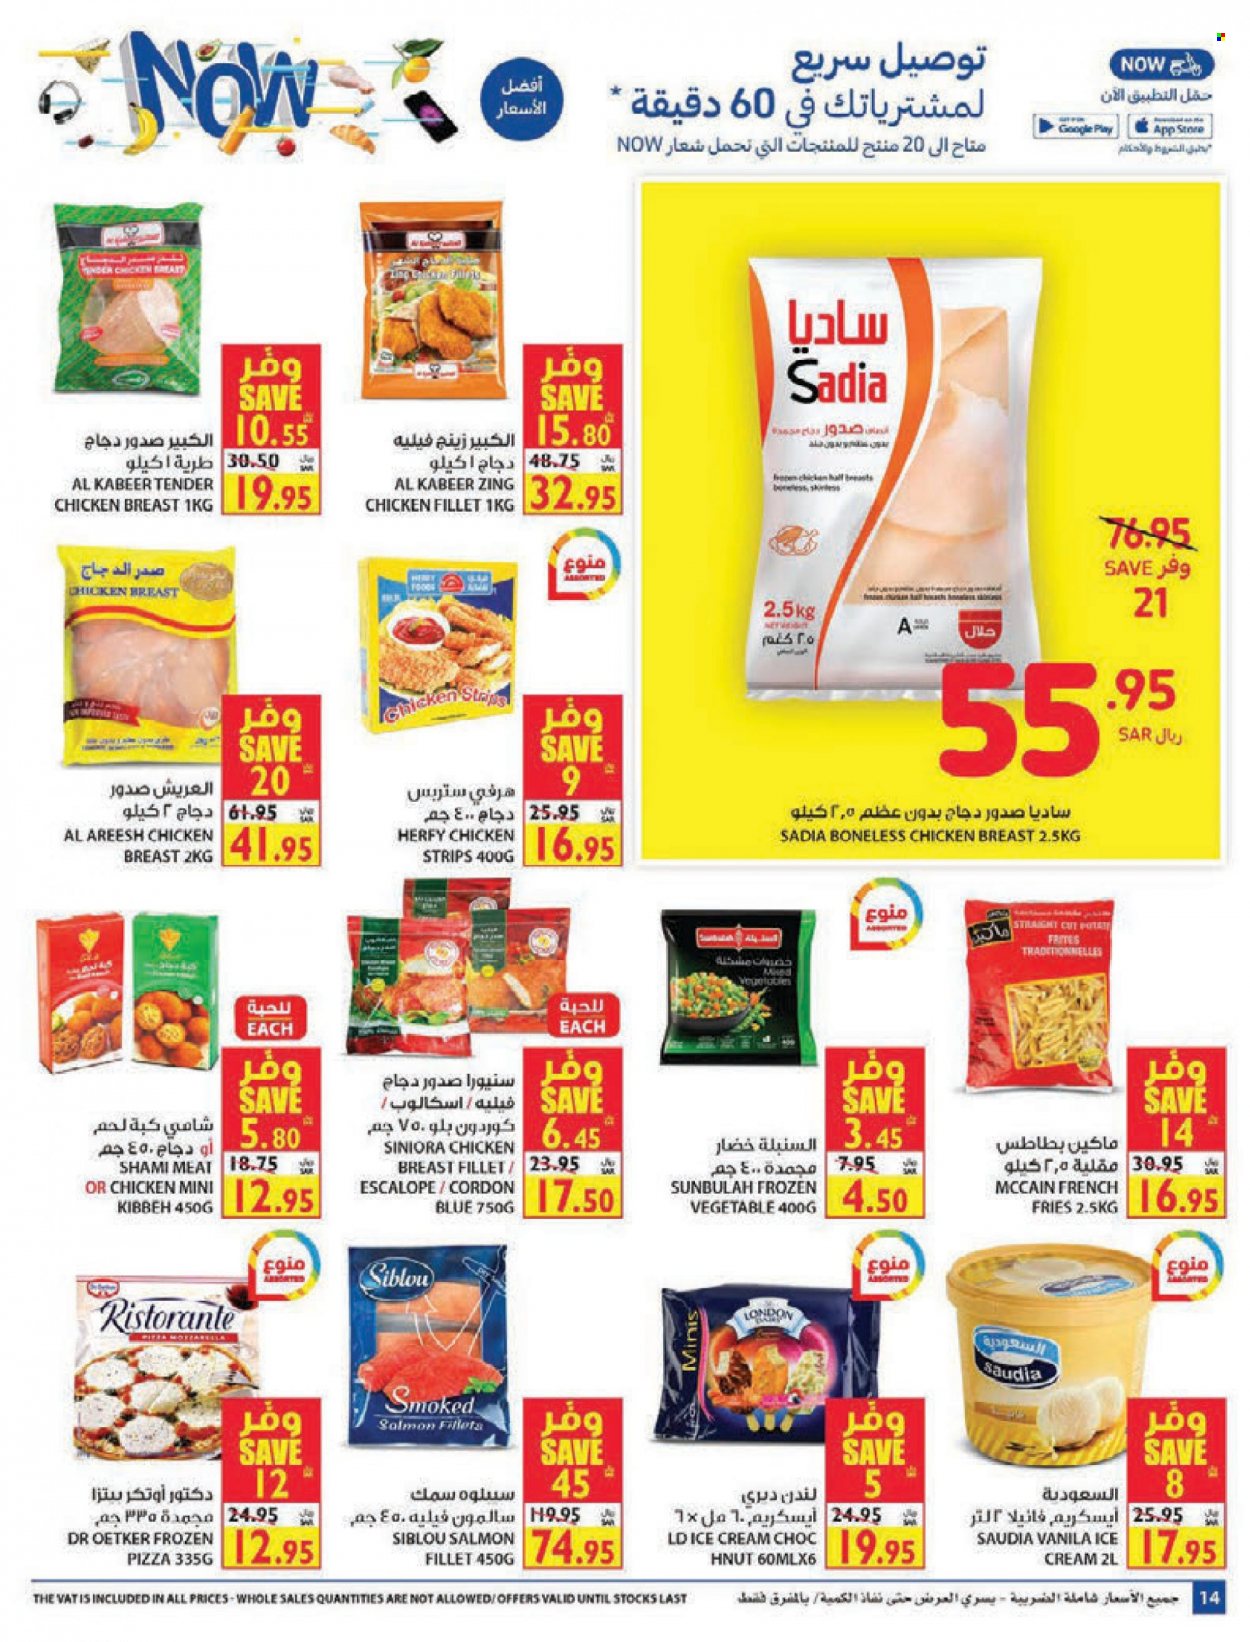 Carrefour flyer  - 10.27.2021 - 11.02.2021. Page 14.